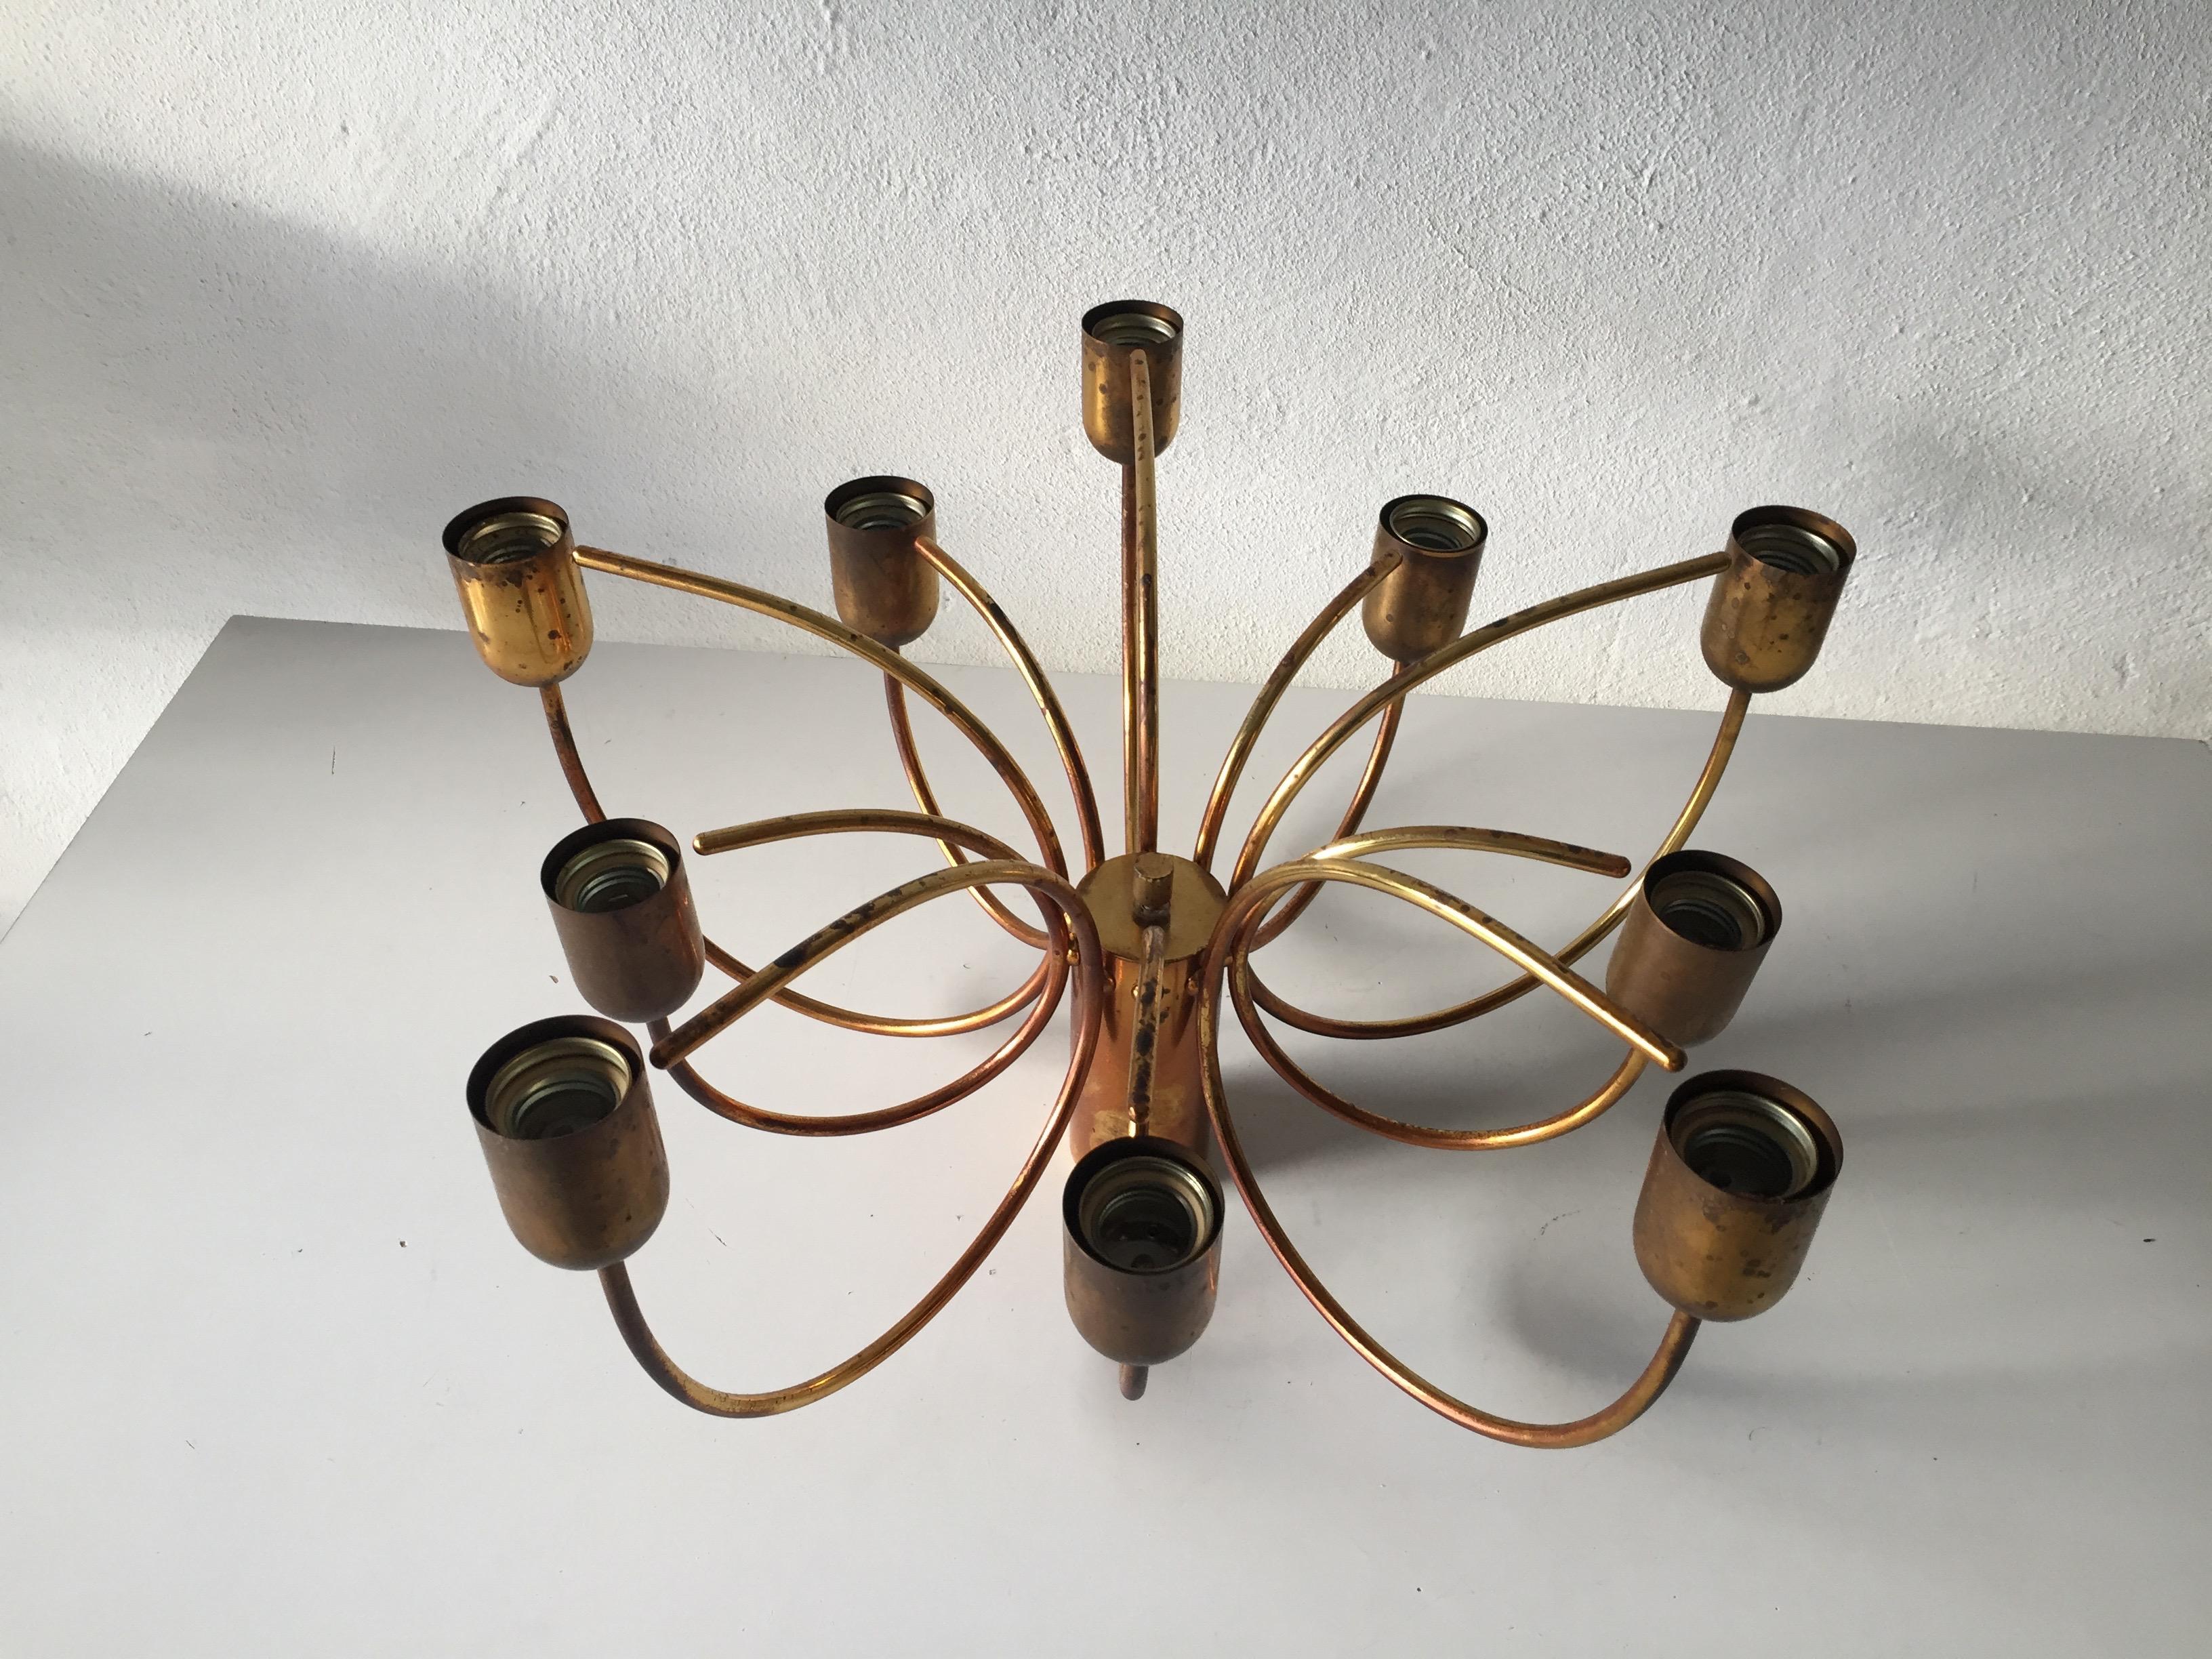 Rare 10 Arc Shaped Arms Full Brass Chandelier by Cosack Leuchten, 1970s Germany For Sale 4